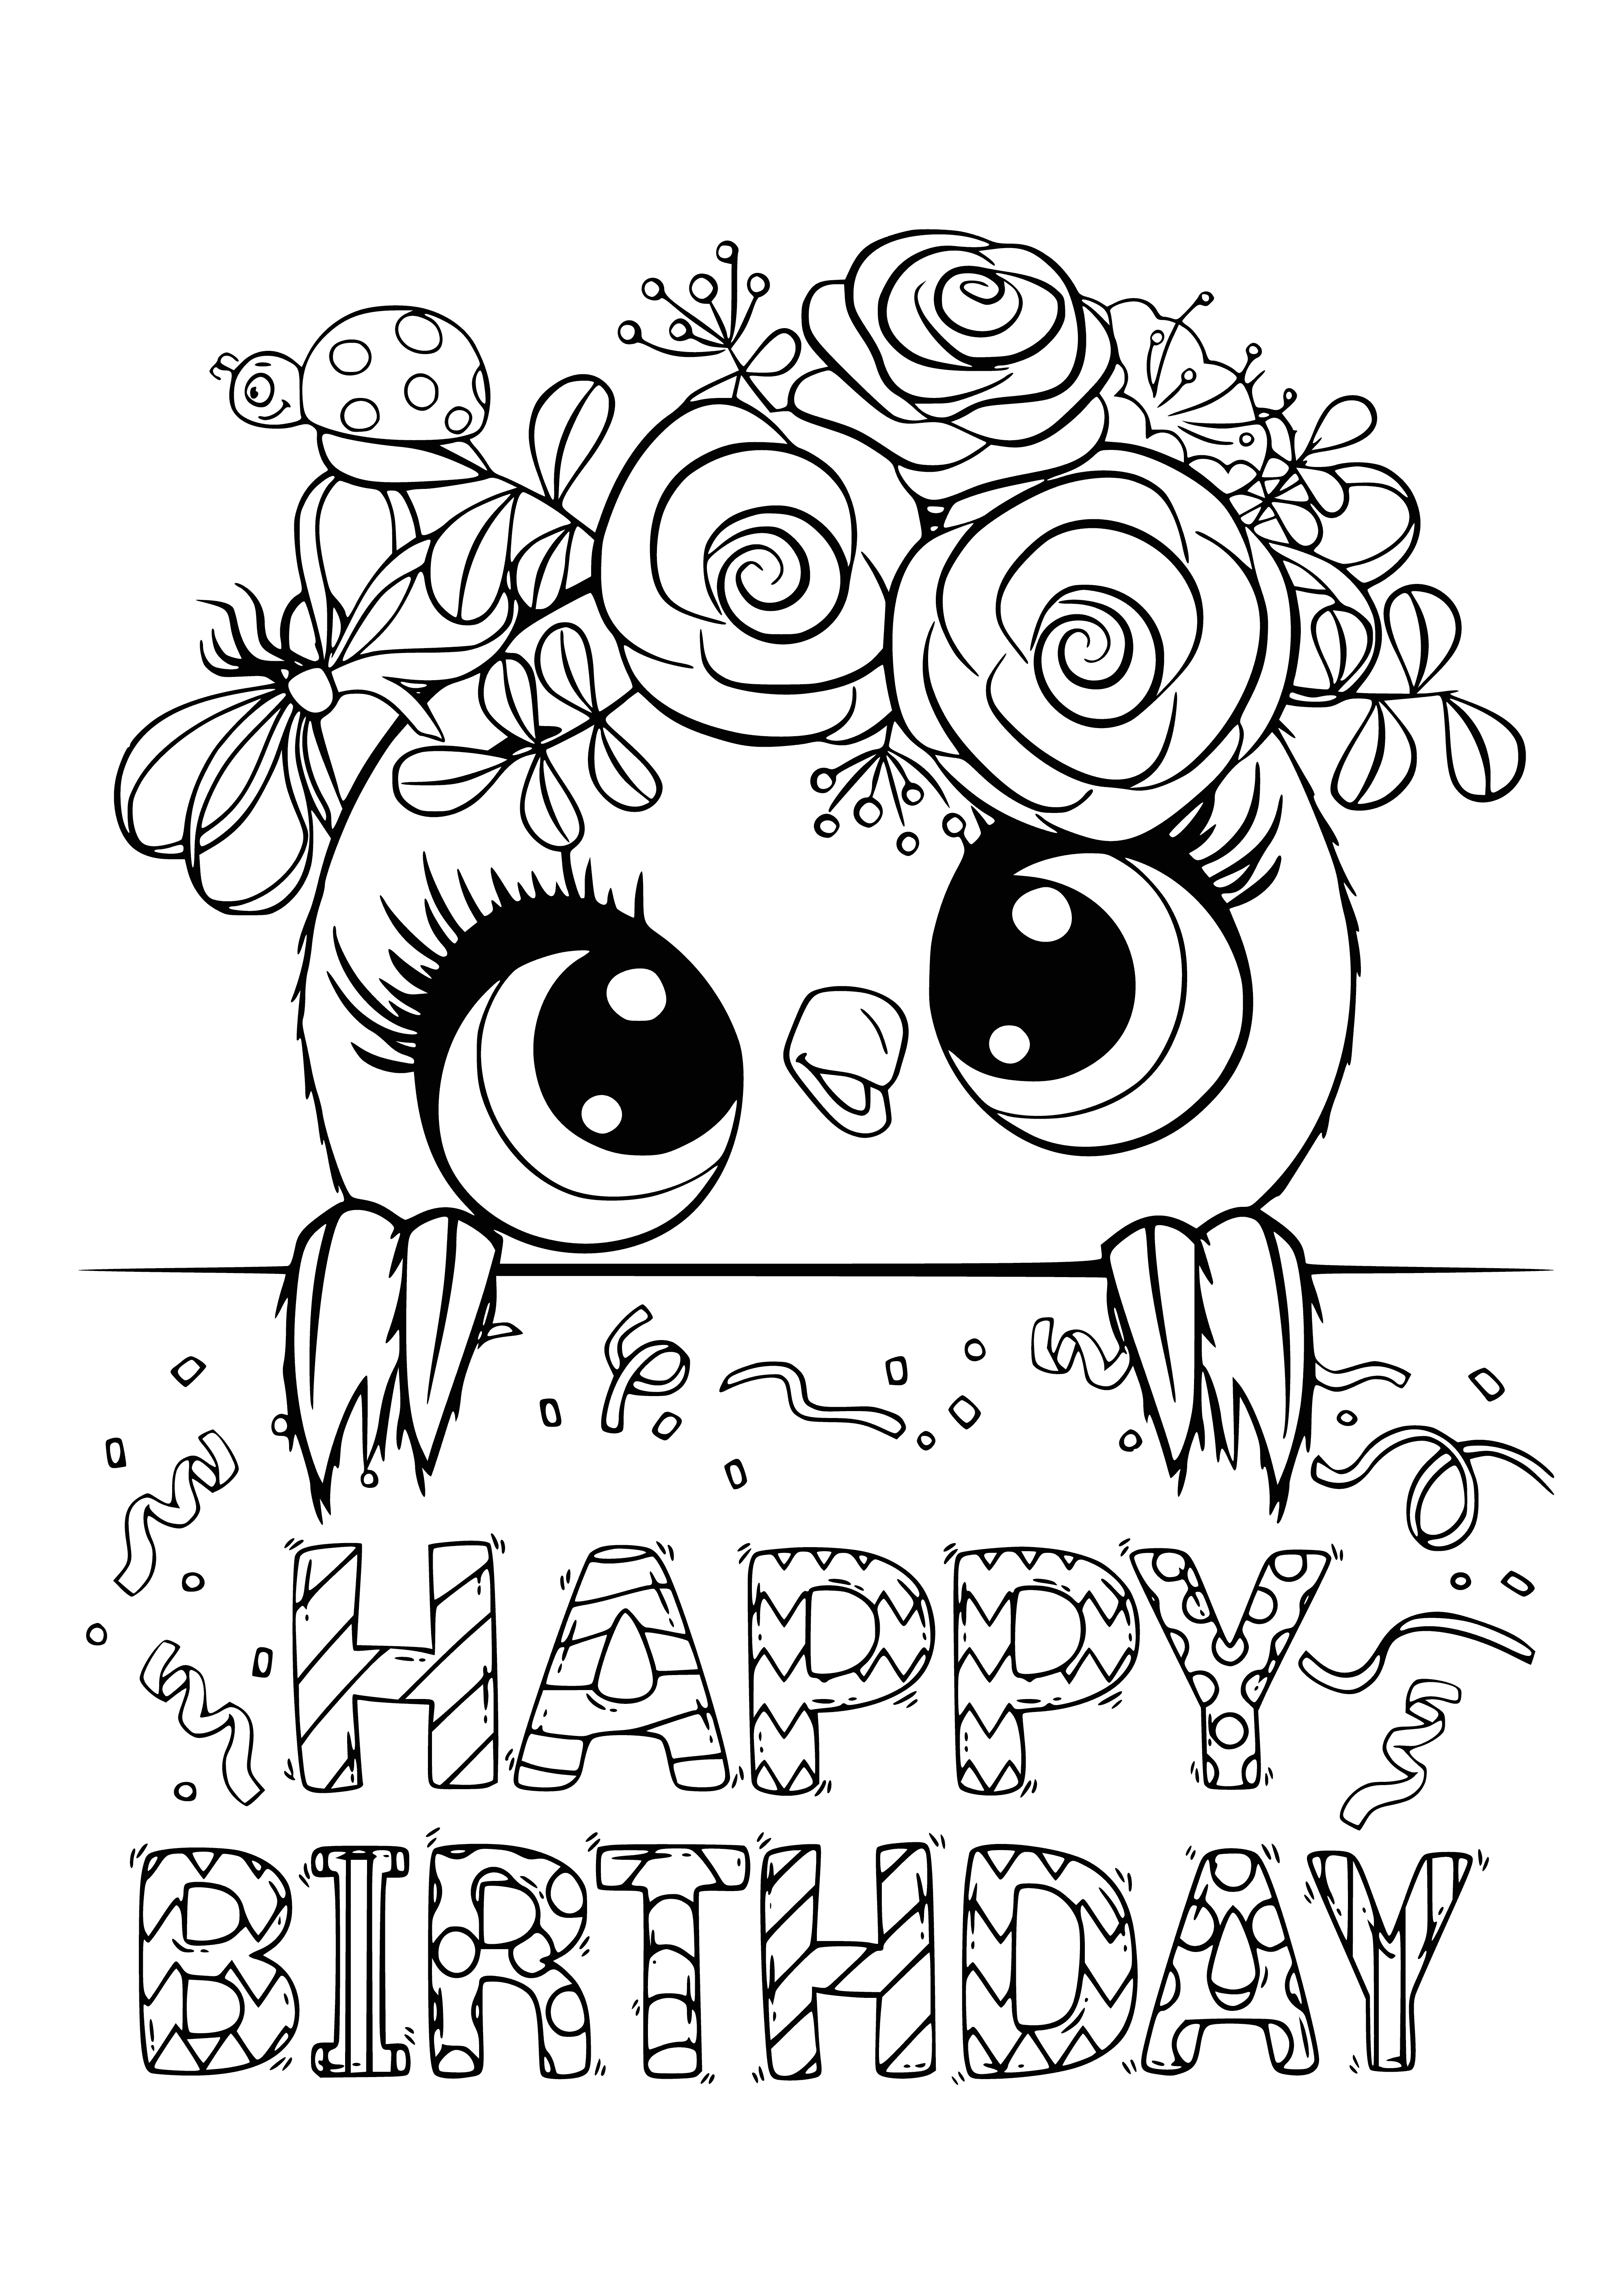 coloring page: Kids celebrating b-day with a cake topped by a cat & mouse, streamers & banners, and blns & confetti strewn around. #PartyTime!